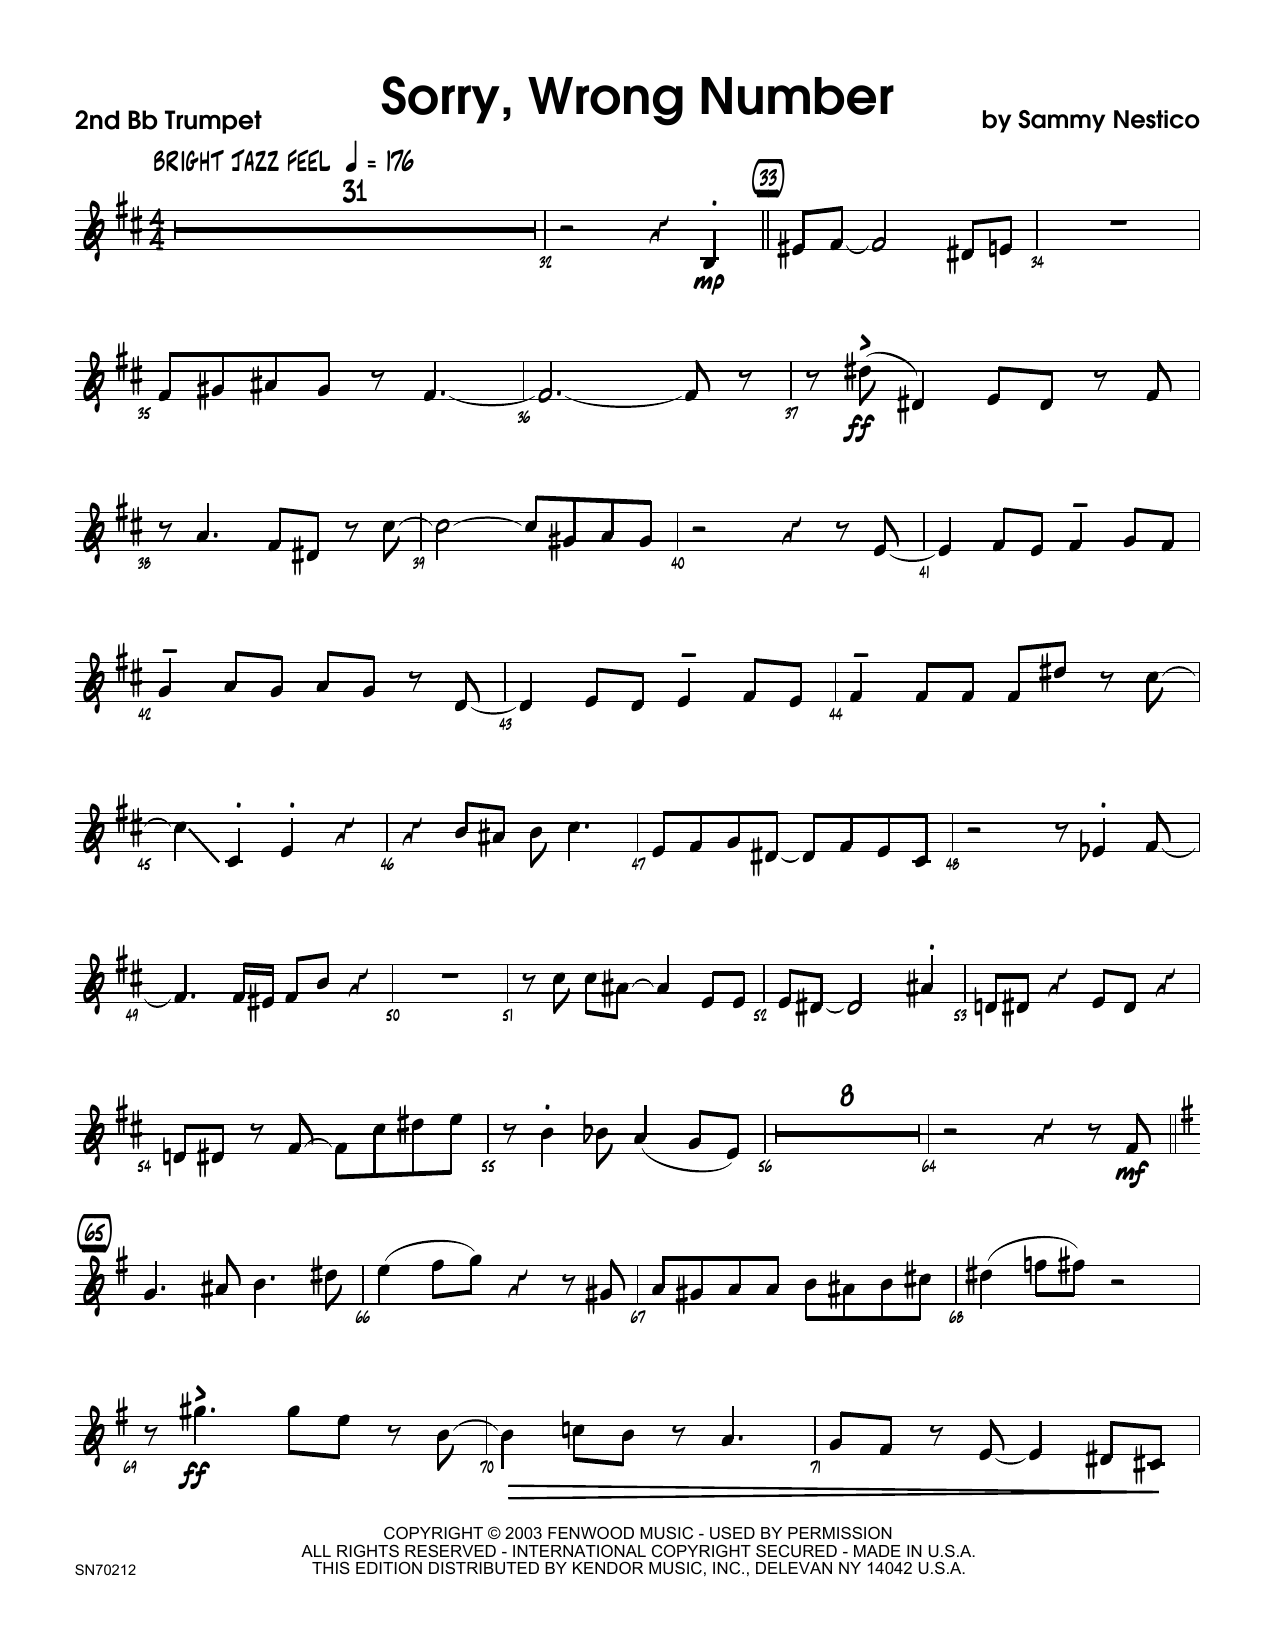 Download Sammy Nestico Sorry, Wrong Number - 2nd Bb Trumpet Sheet Music